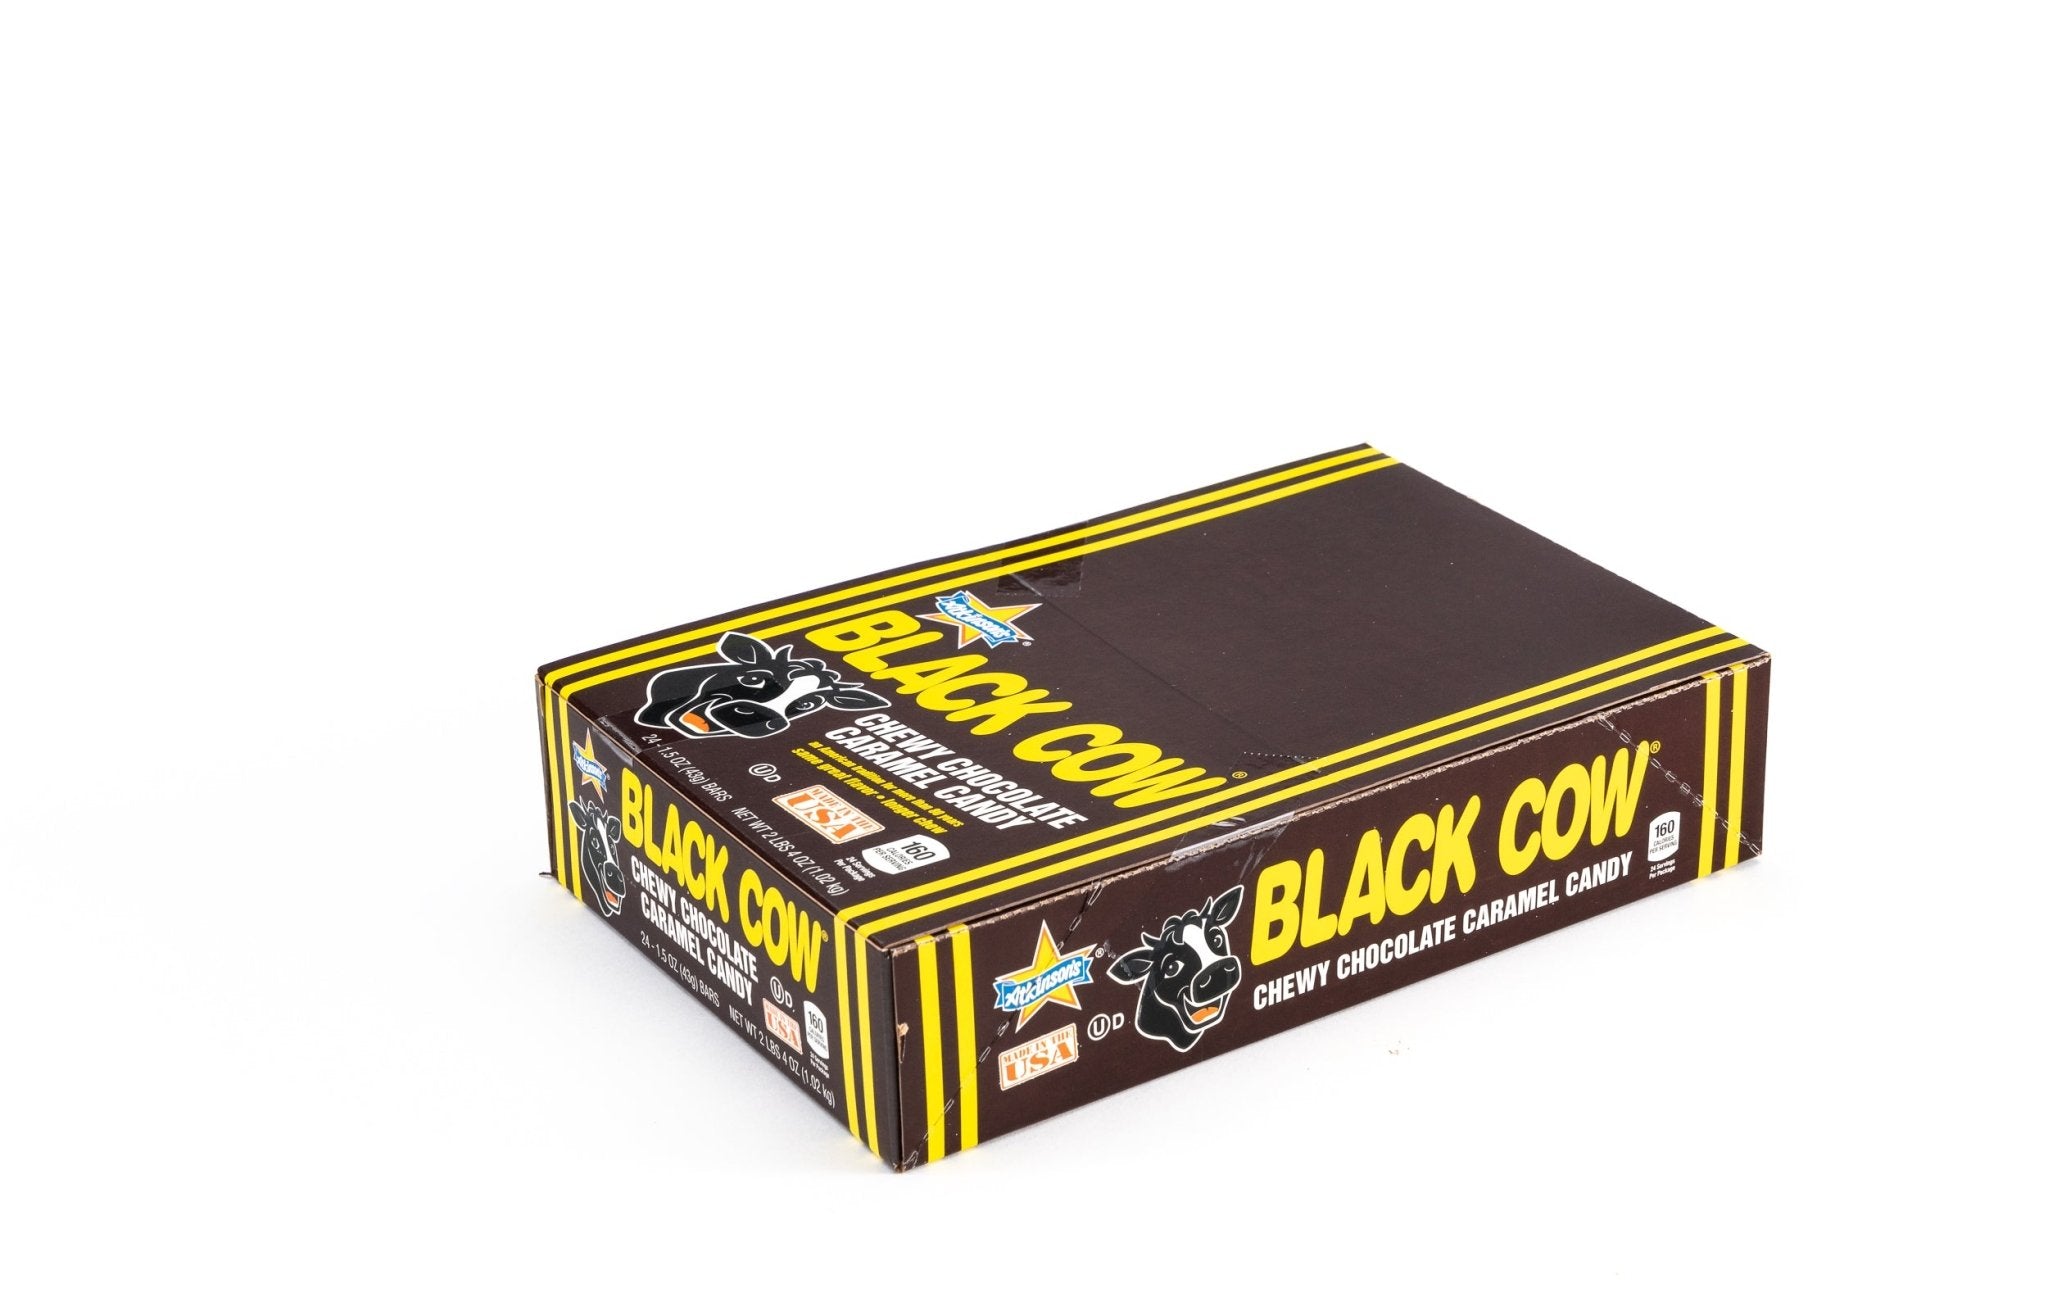 Copy of Black Cow Chewy Chocolate Caramel Bar Bulk Pack (1.5 oz, 24 Ct.) - Vintage Candy Co.